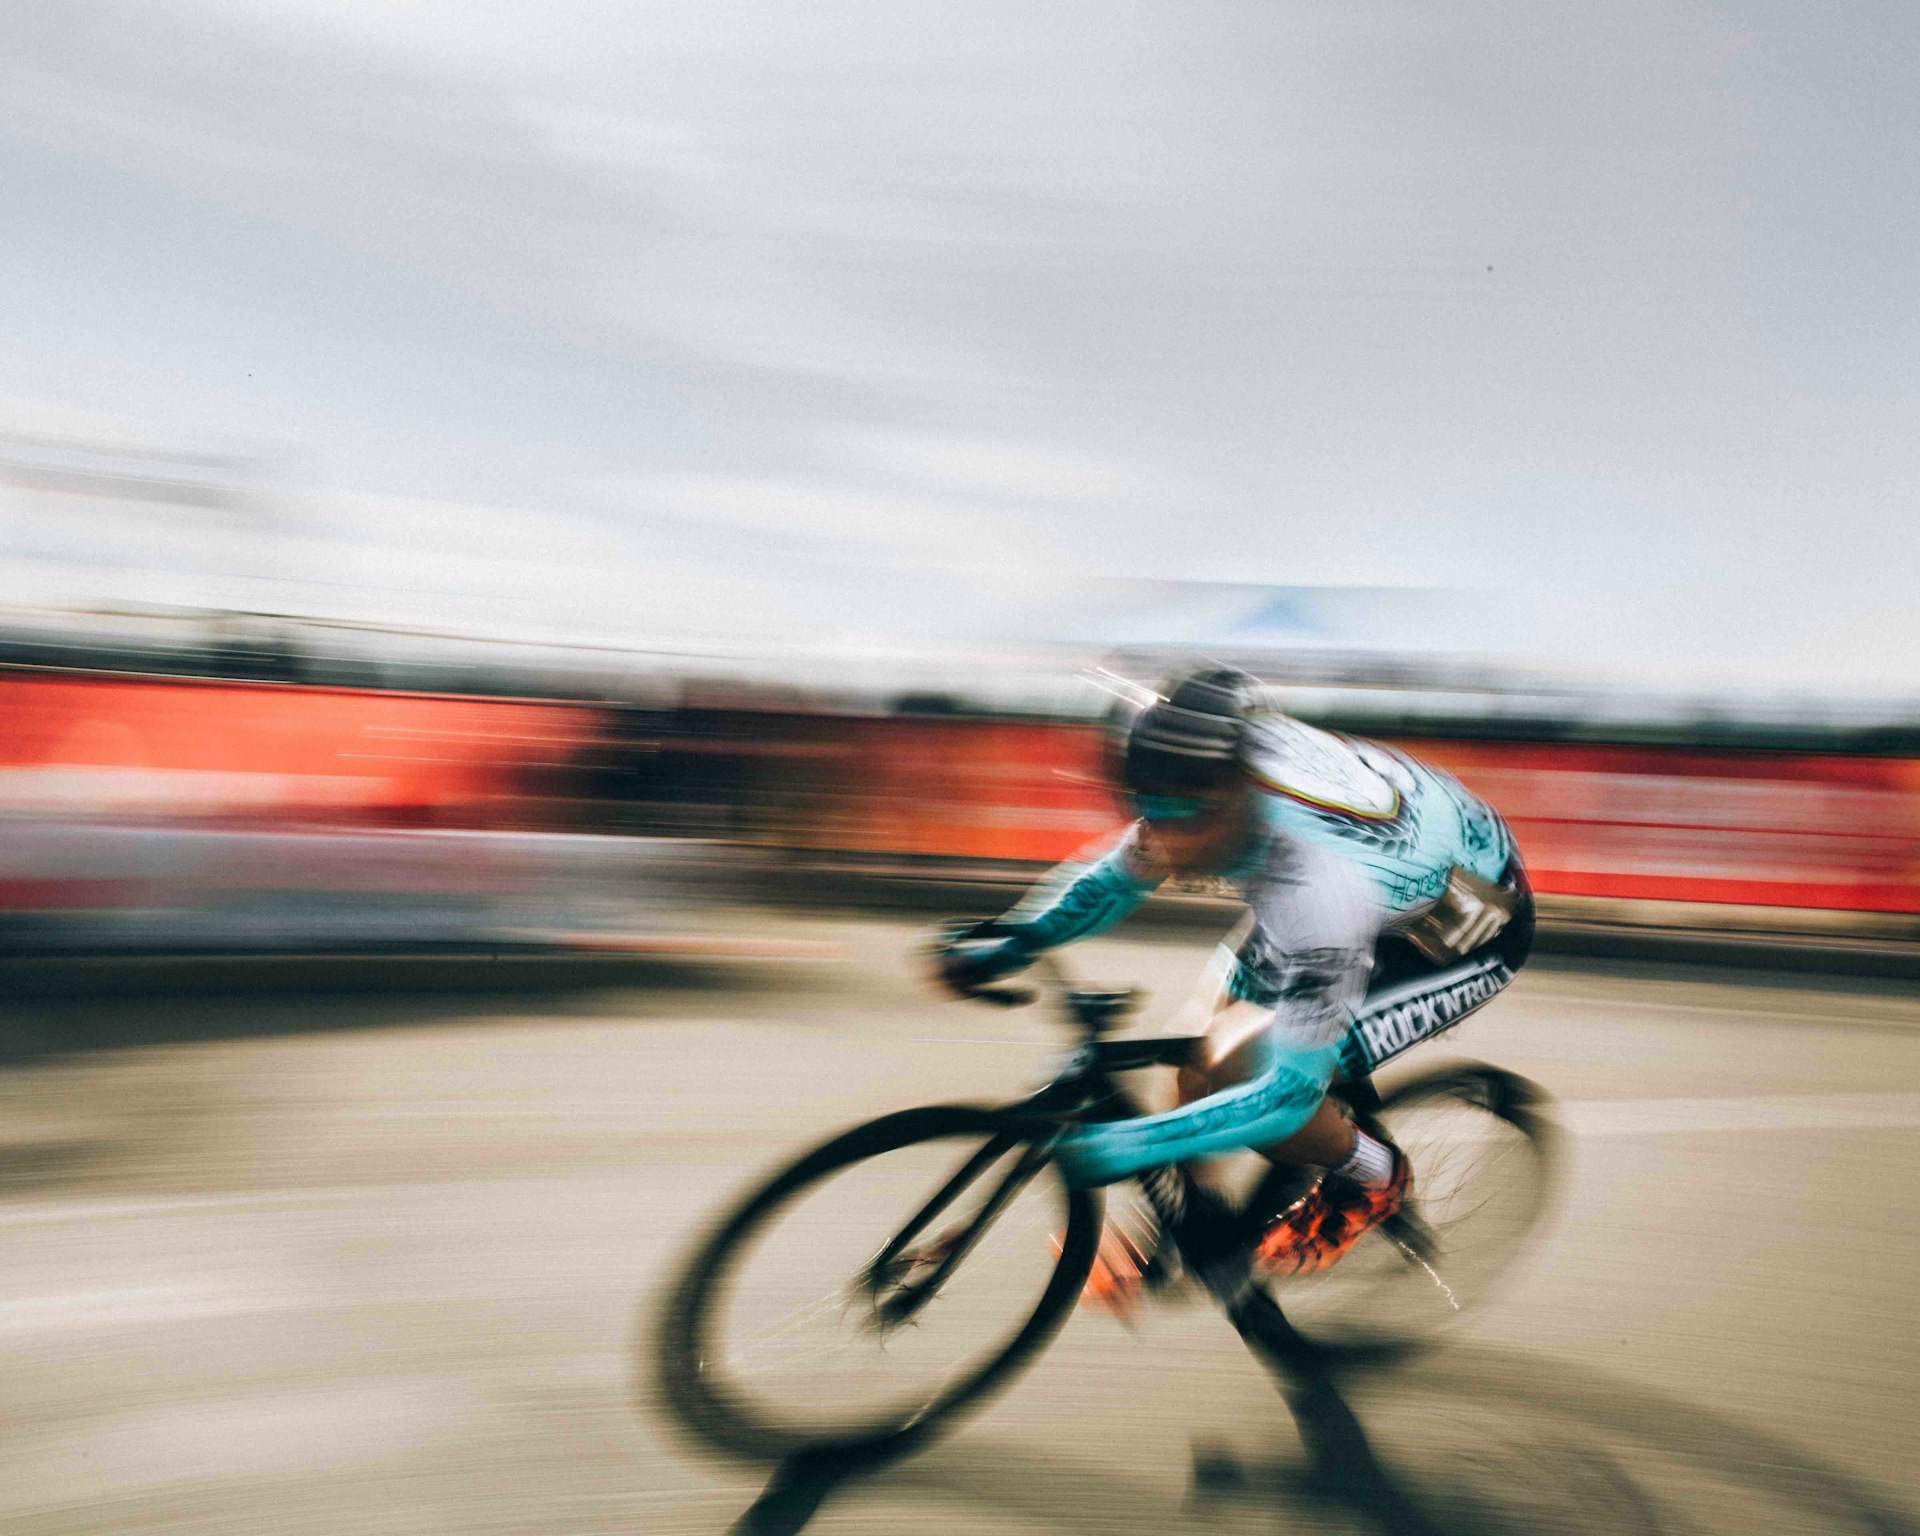 The Big Race For Brooklyn: Inside the Red Hook Crit